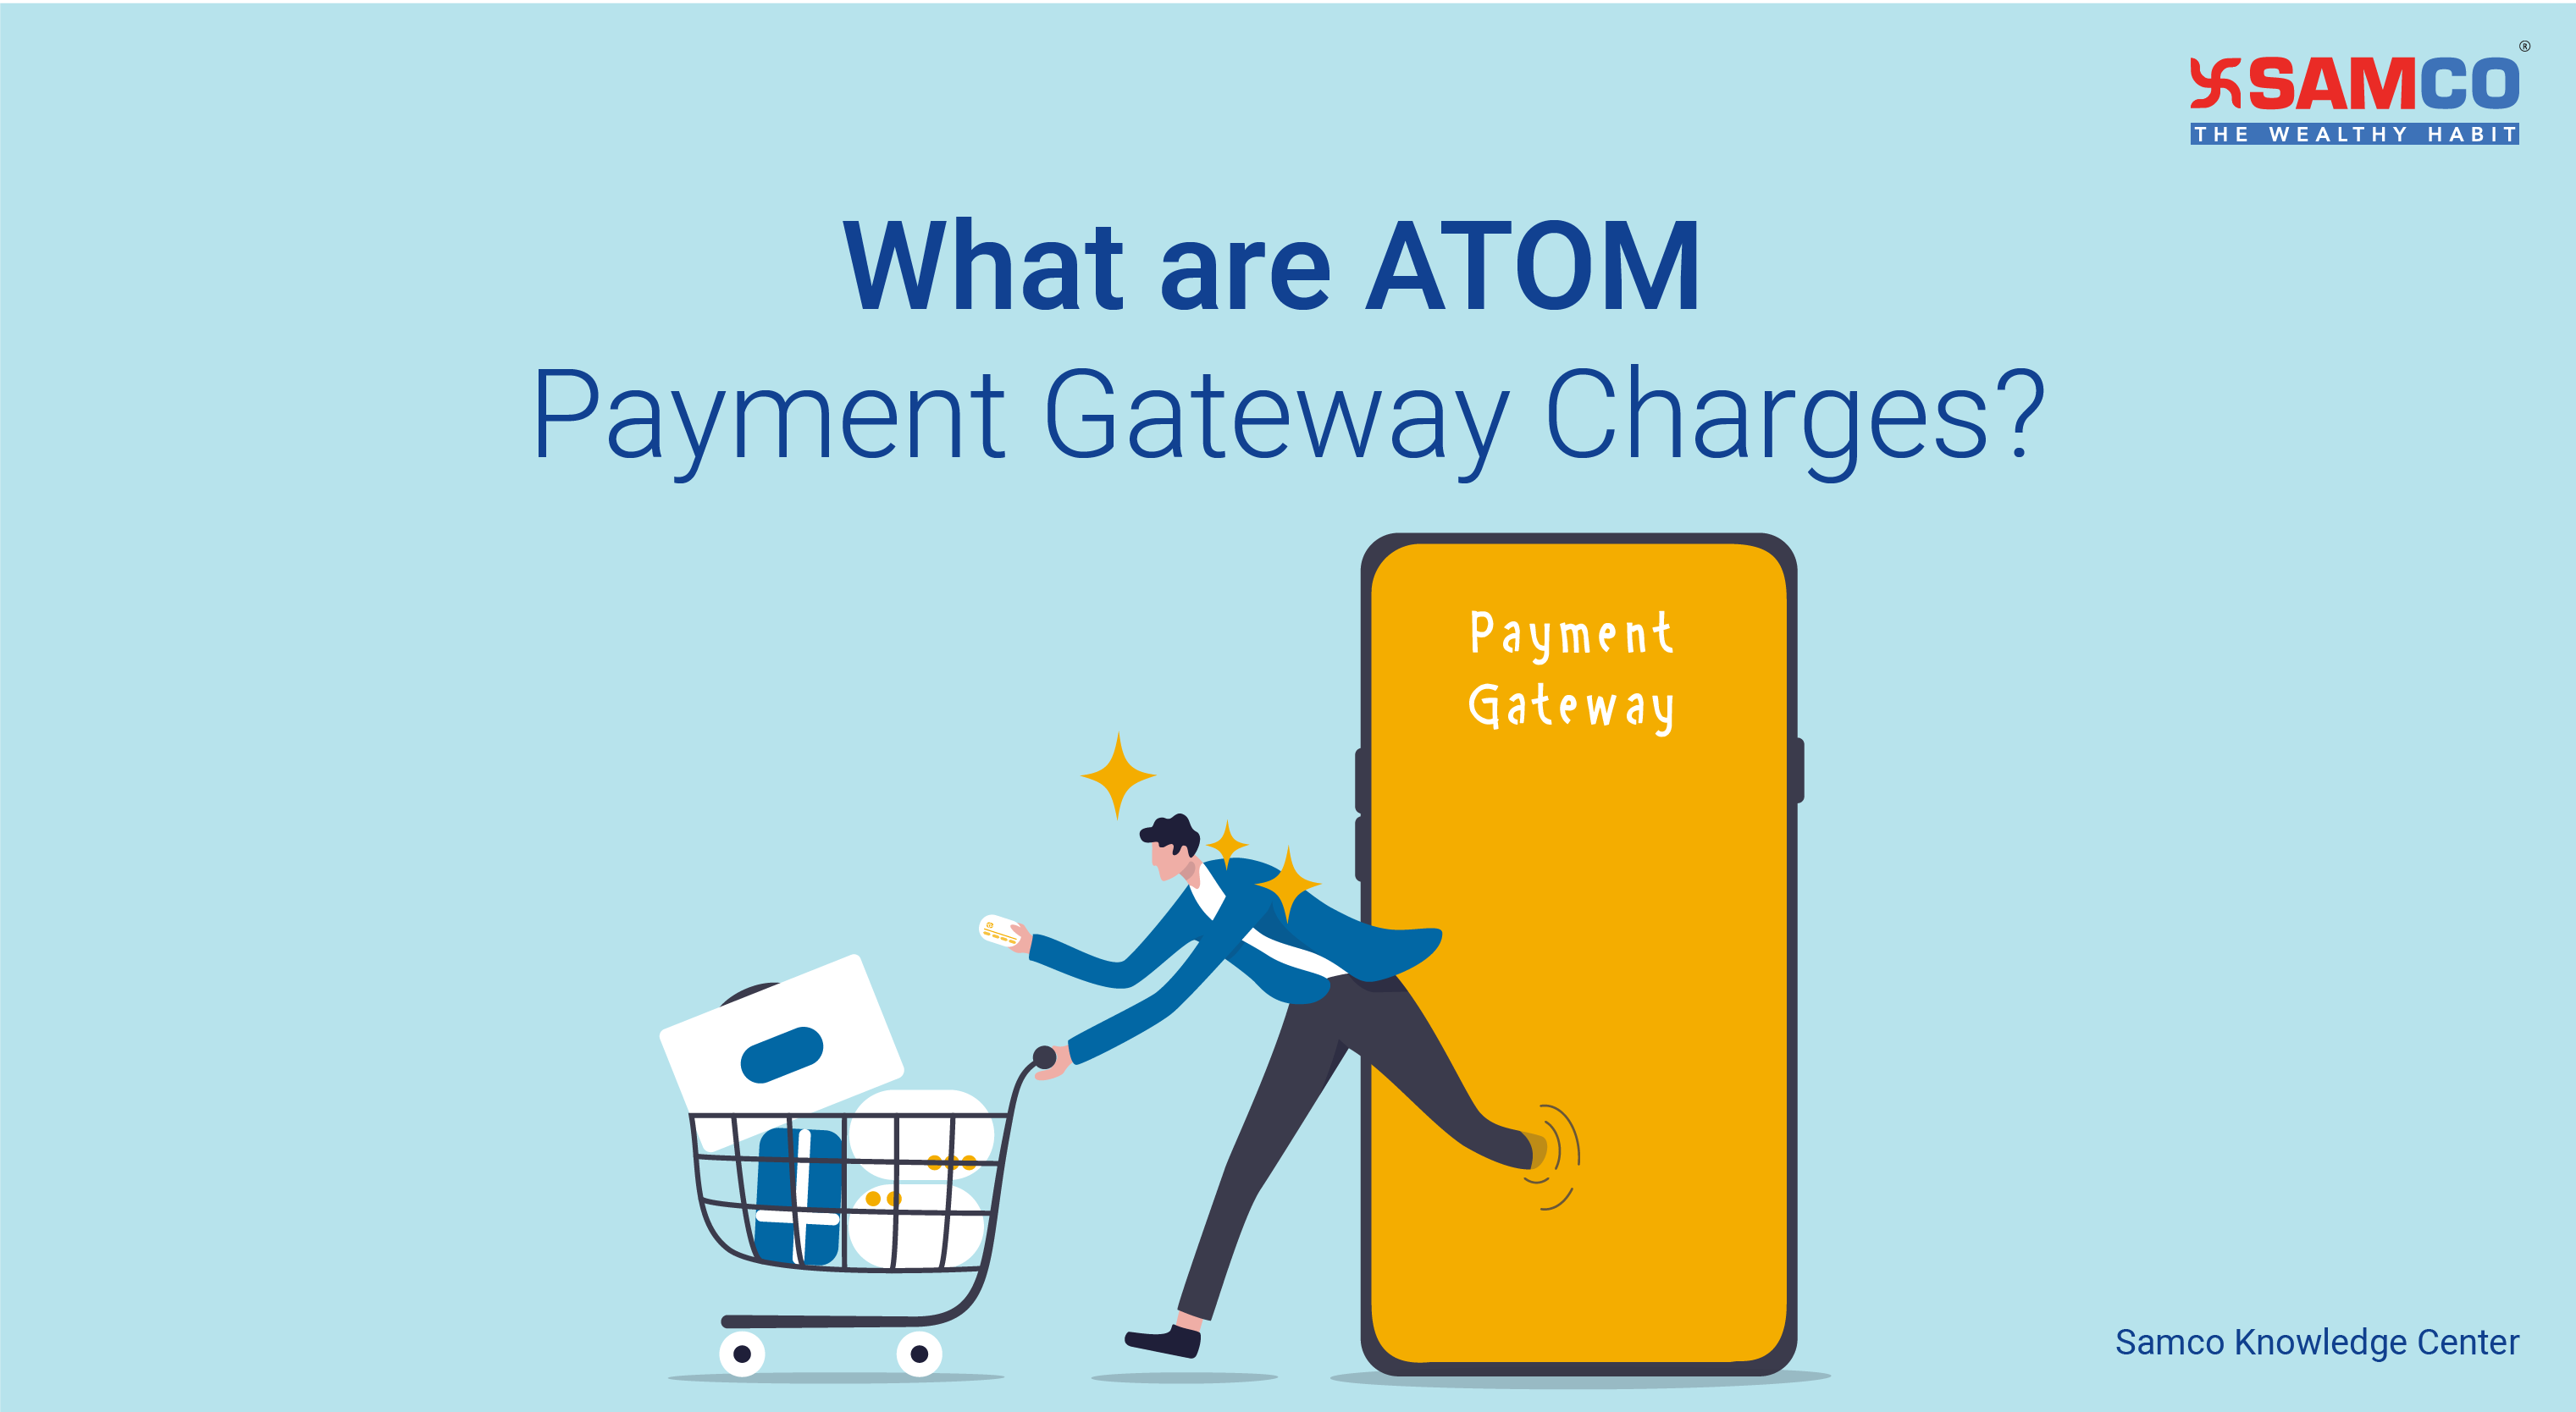 What are ATOM Payment Gateway Charges?